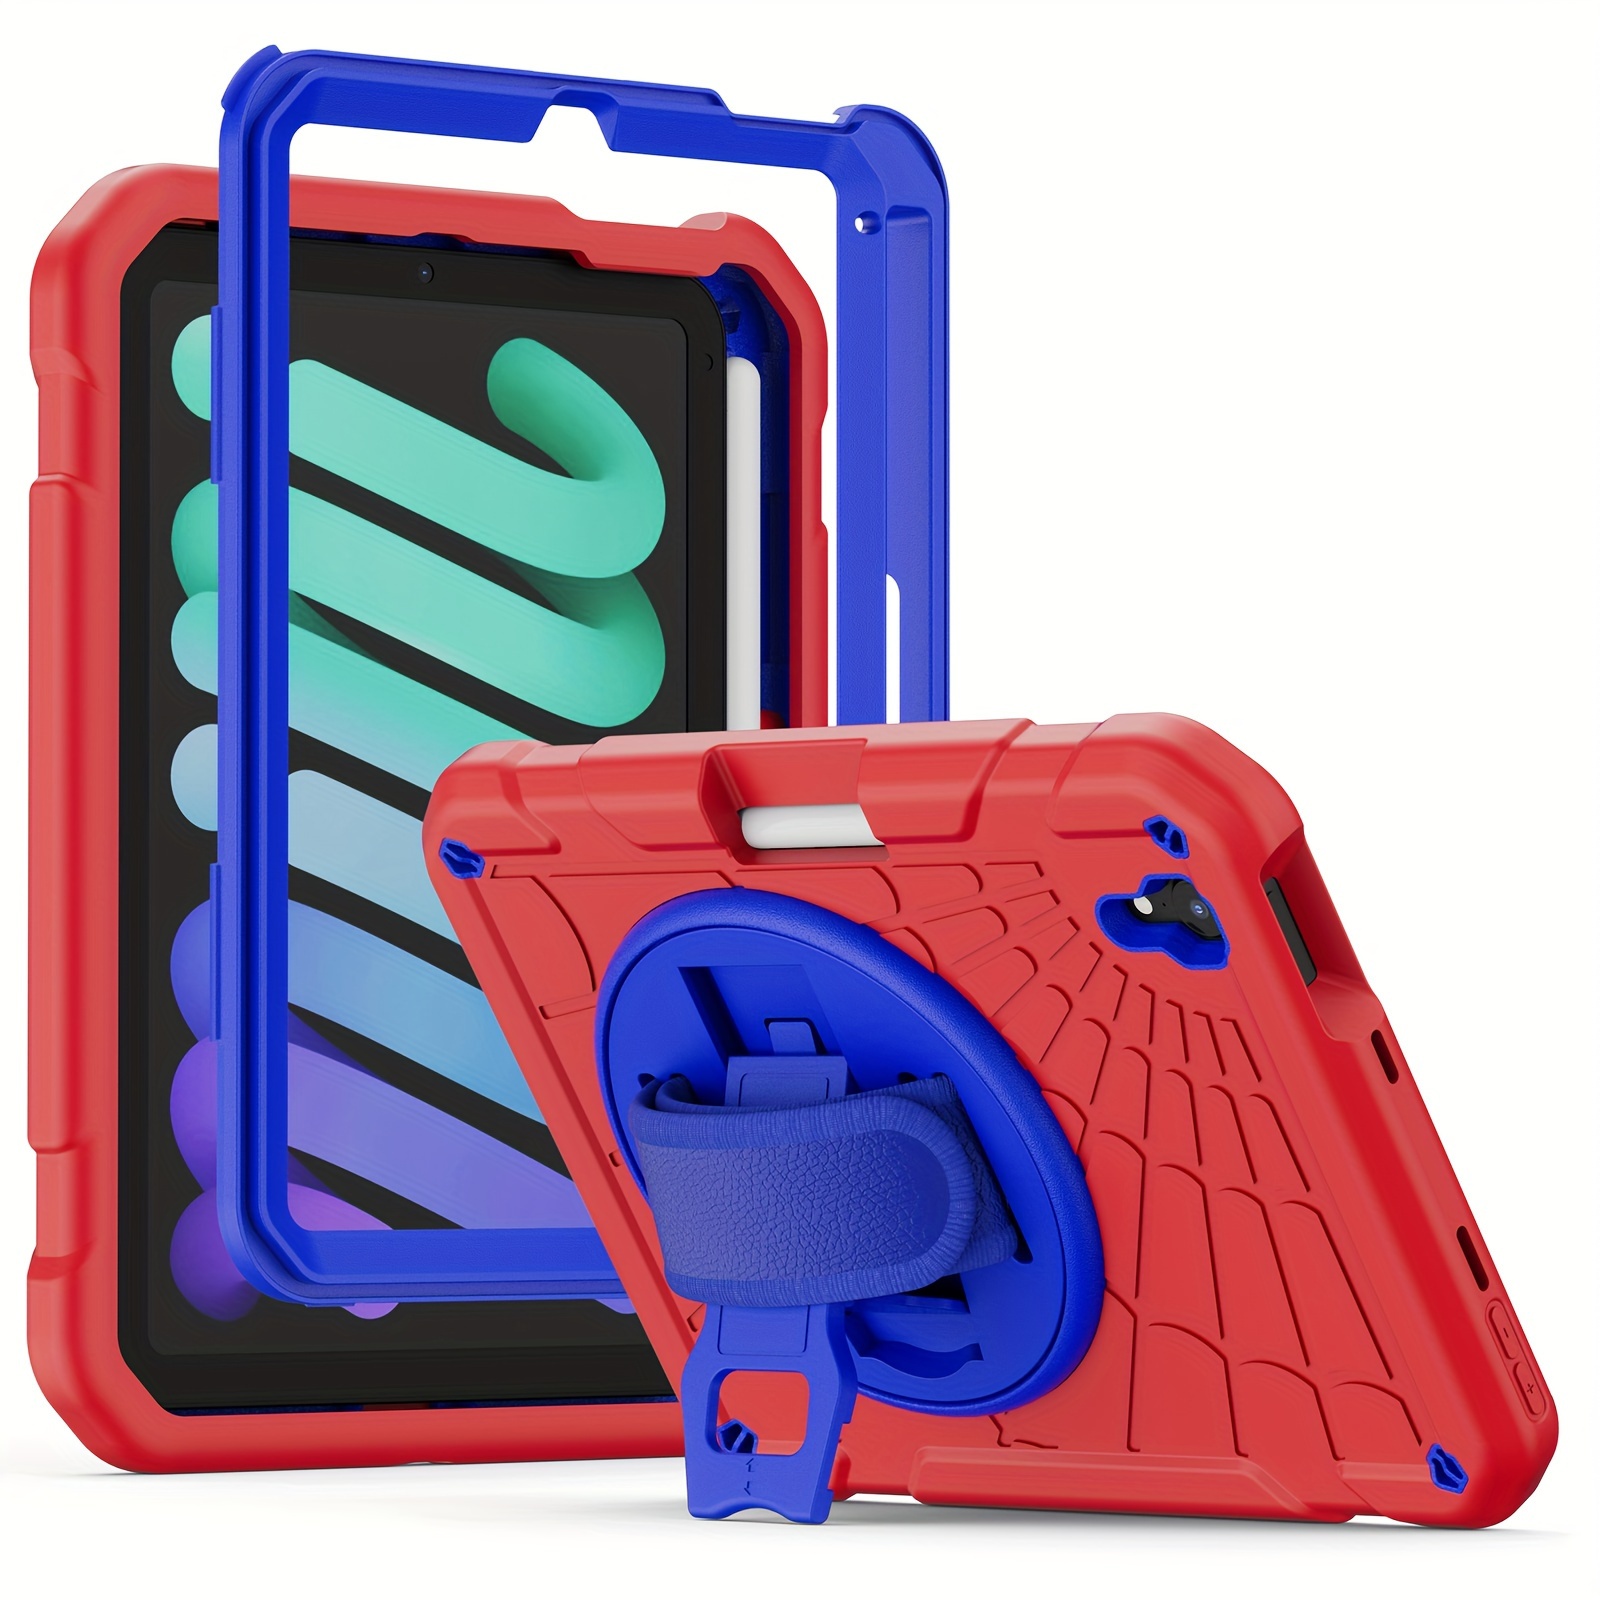 Children's red iPad mini (6th gen) Case and Screen Protector